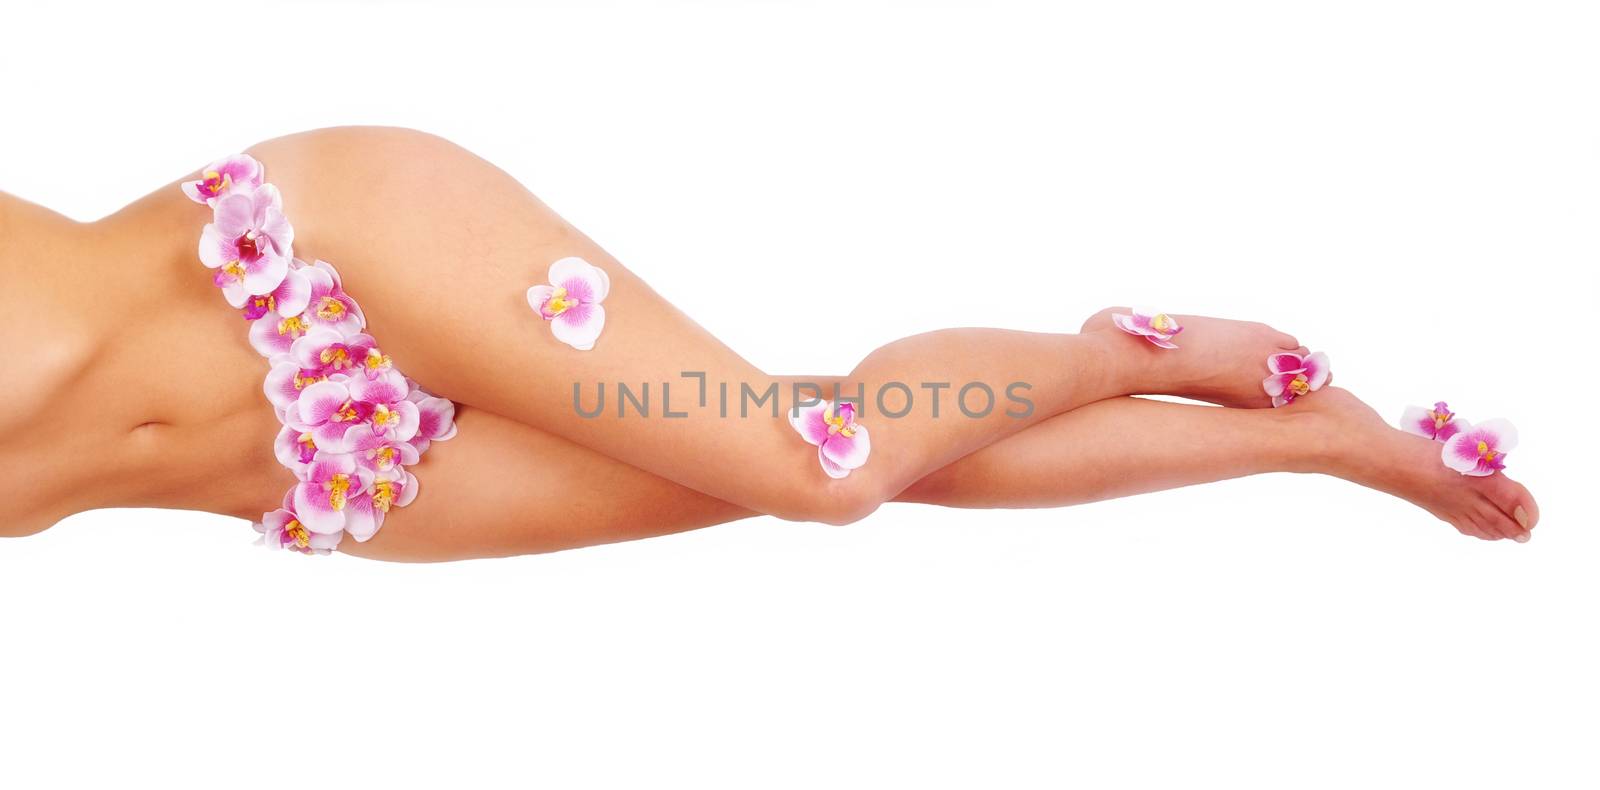 Beautiful feet of young girl in shorts with an orchid by Nikola30